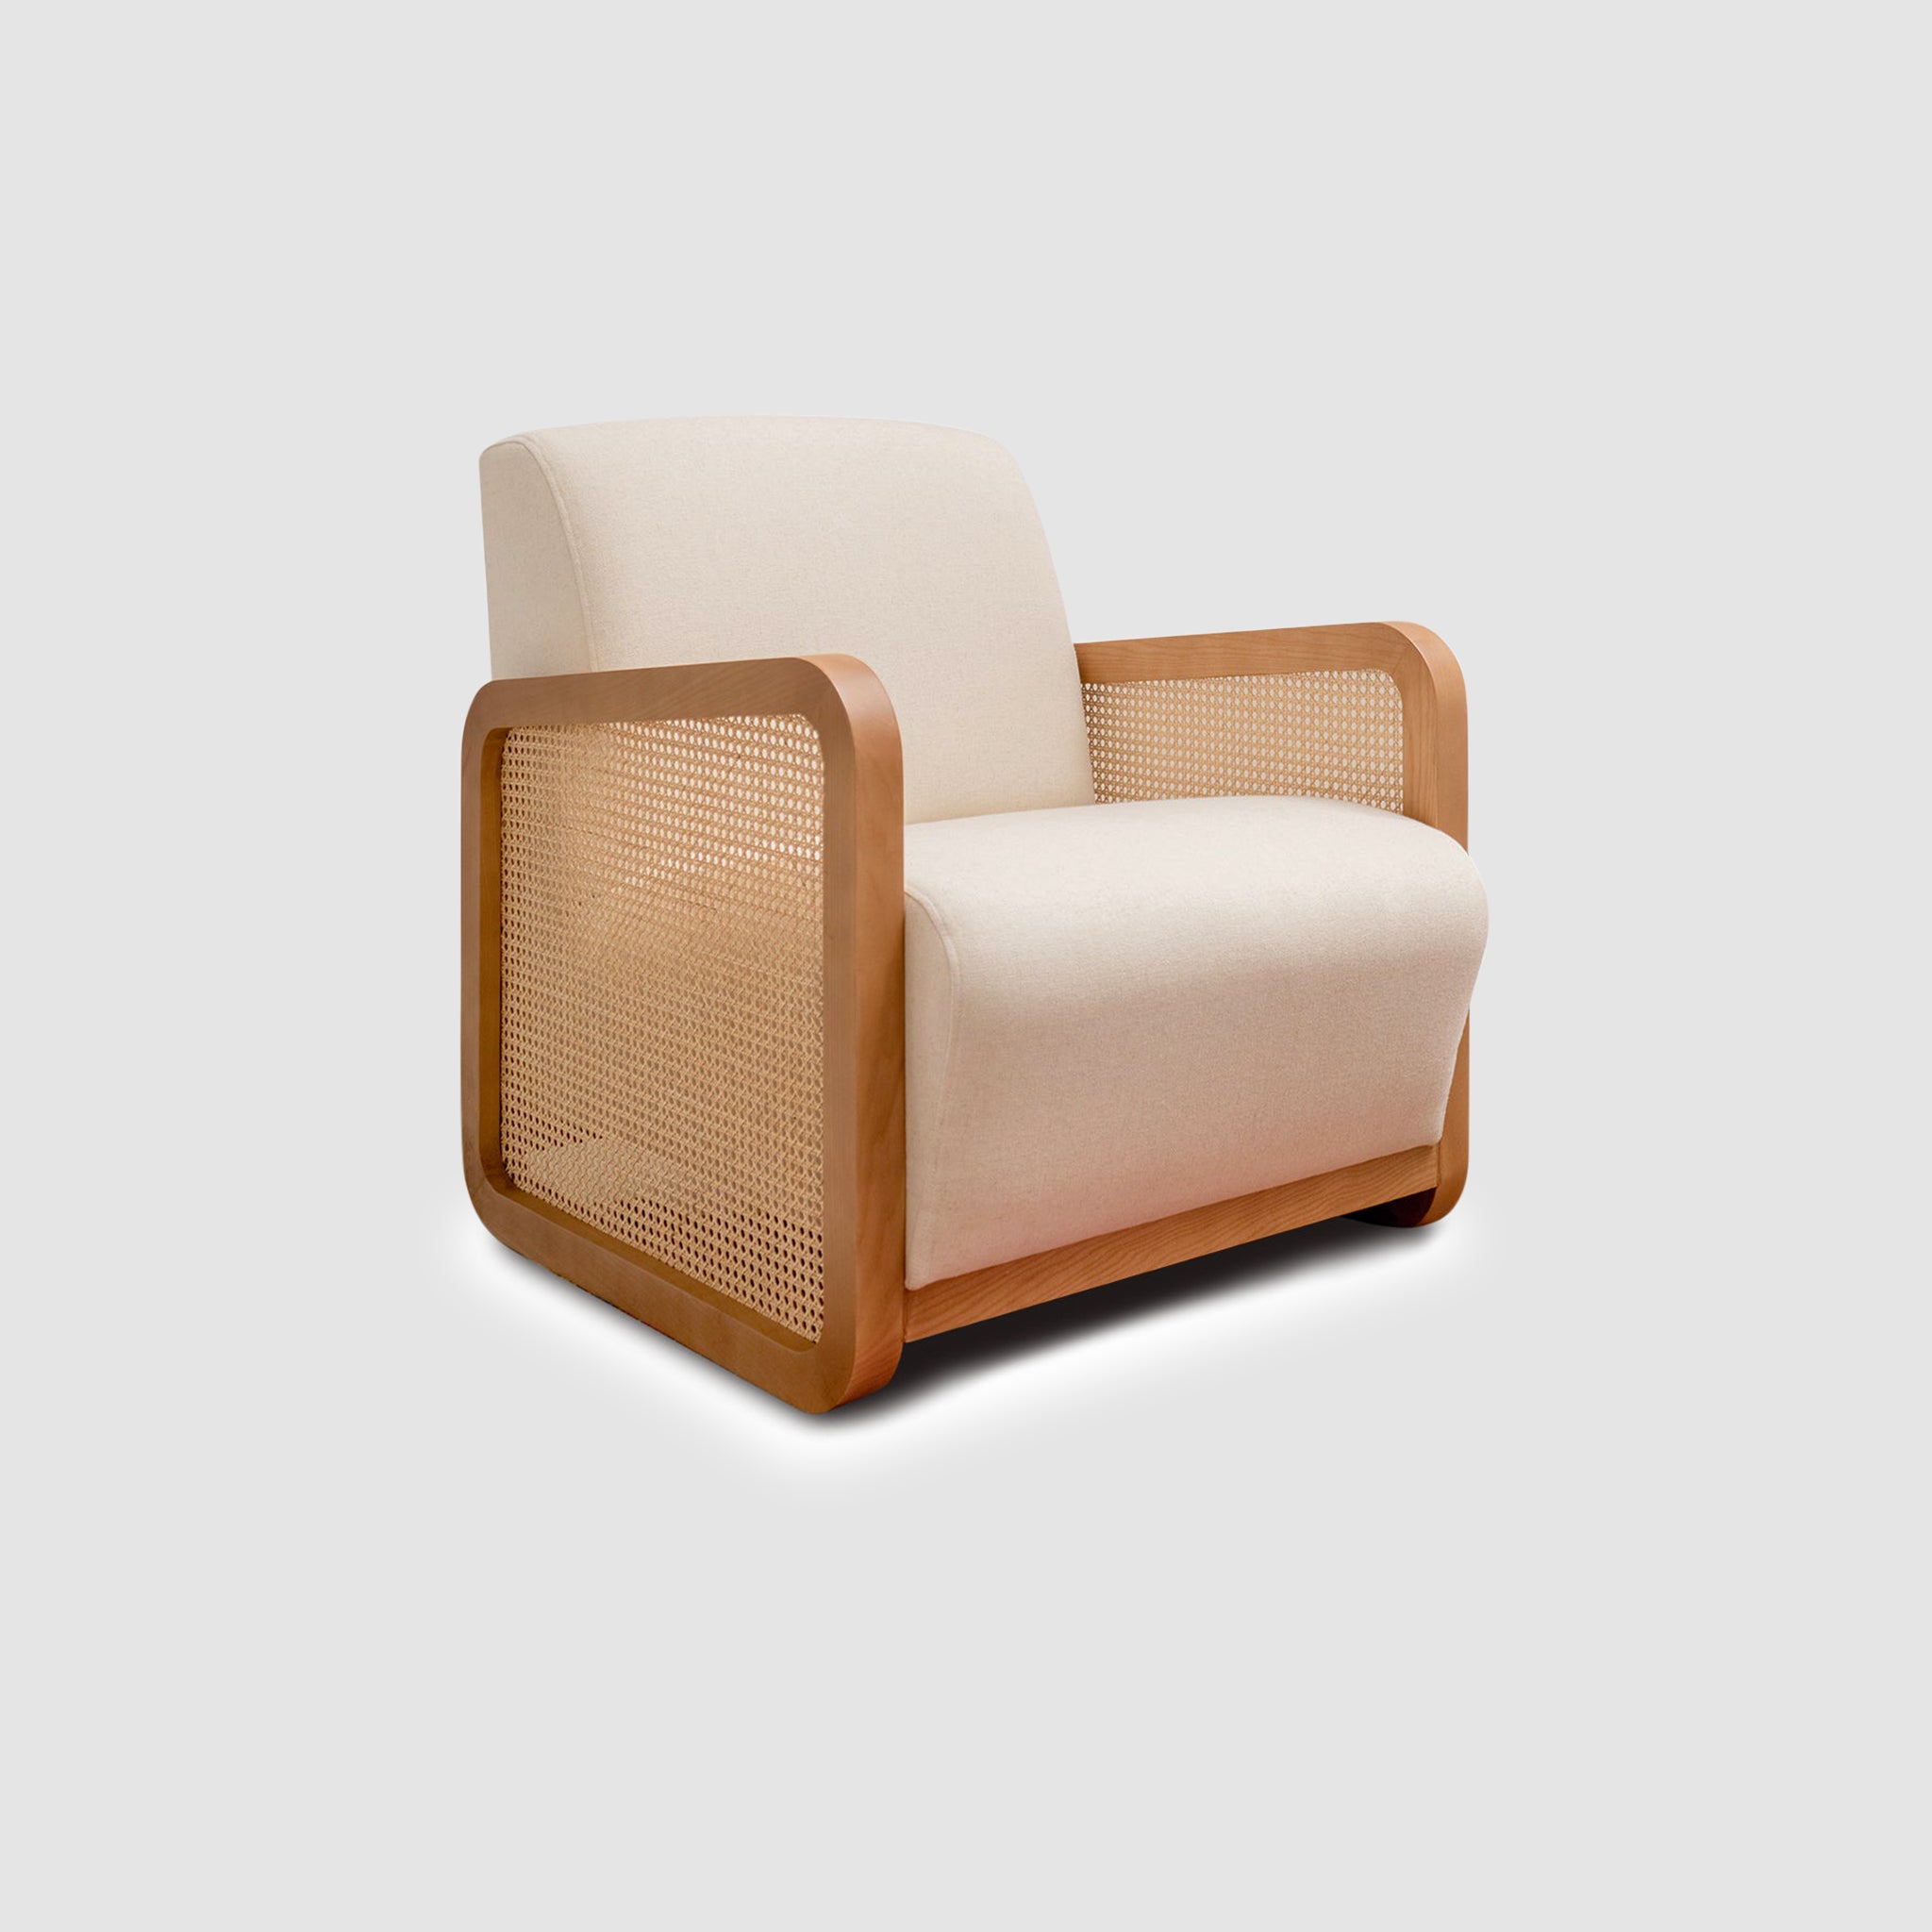 Modern design of The Georgia Accent Chair featuring a beige upholstered seat and curved wooden frame with woven cane sides, angled view.